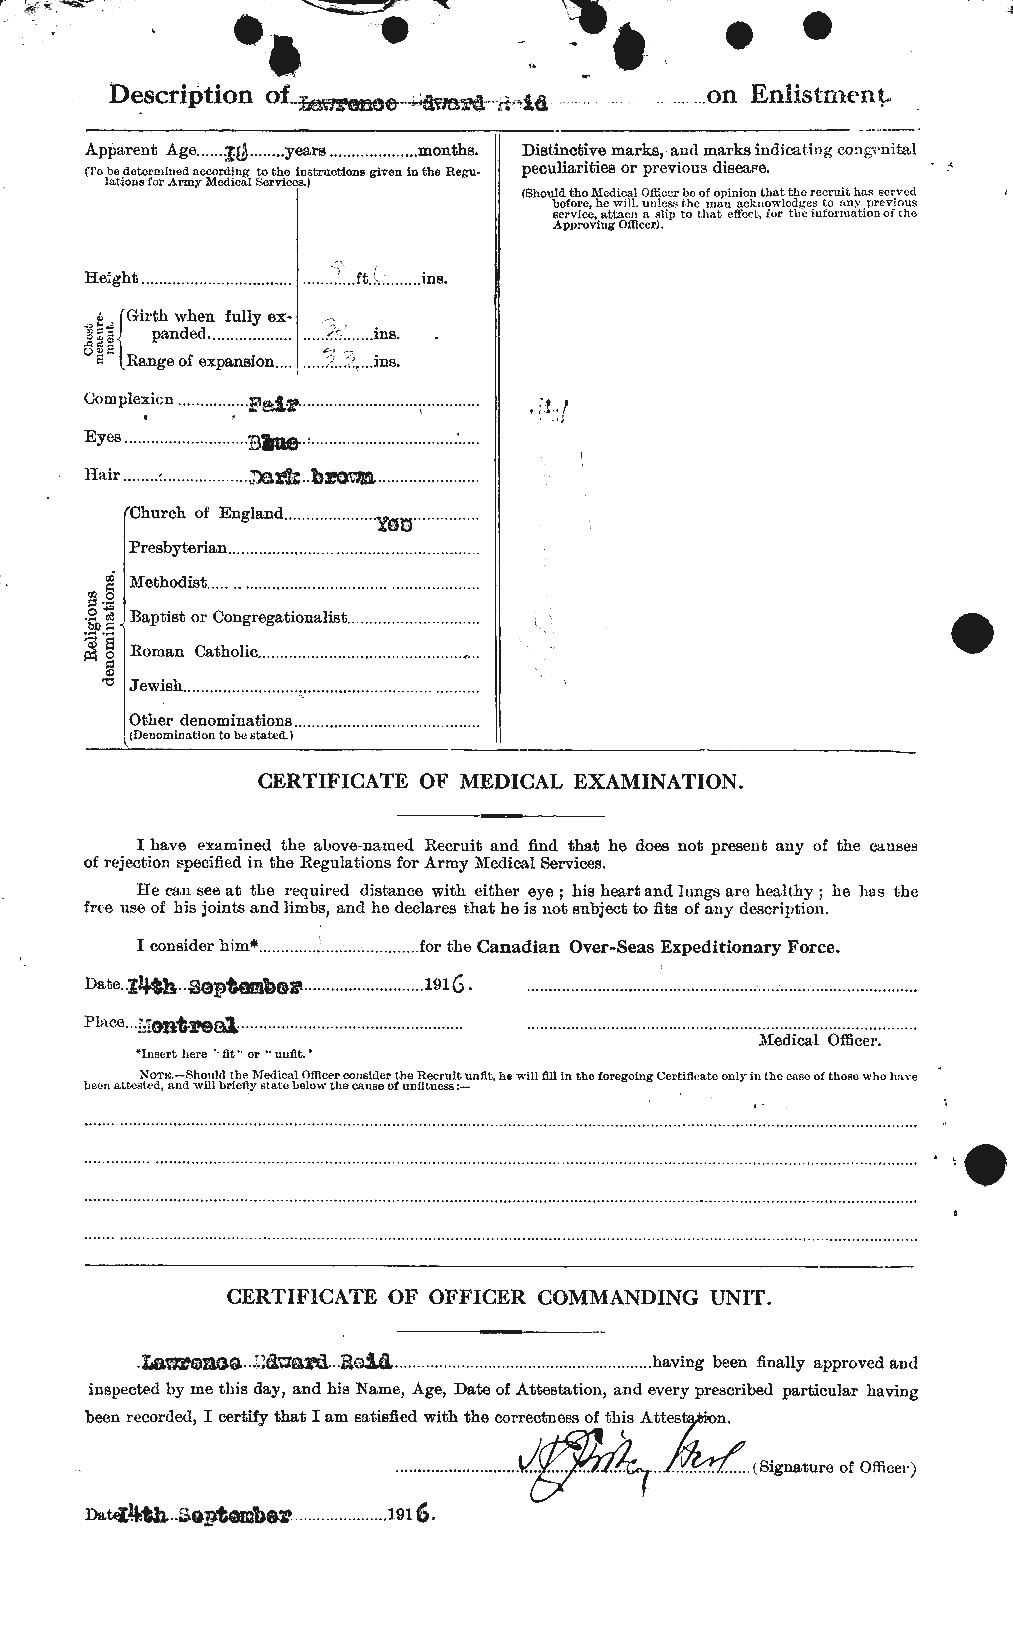 Personnel Records of the First World War - CEF 598912b